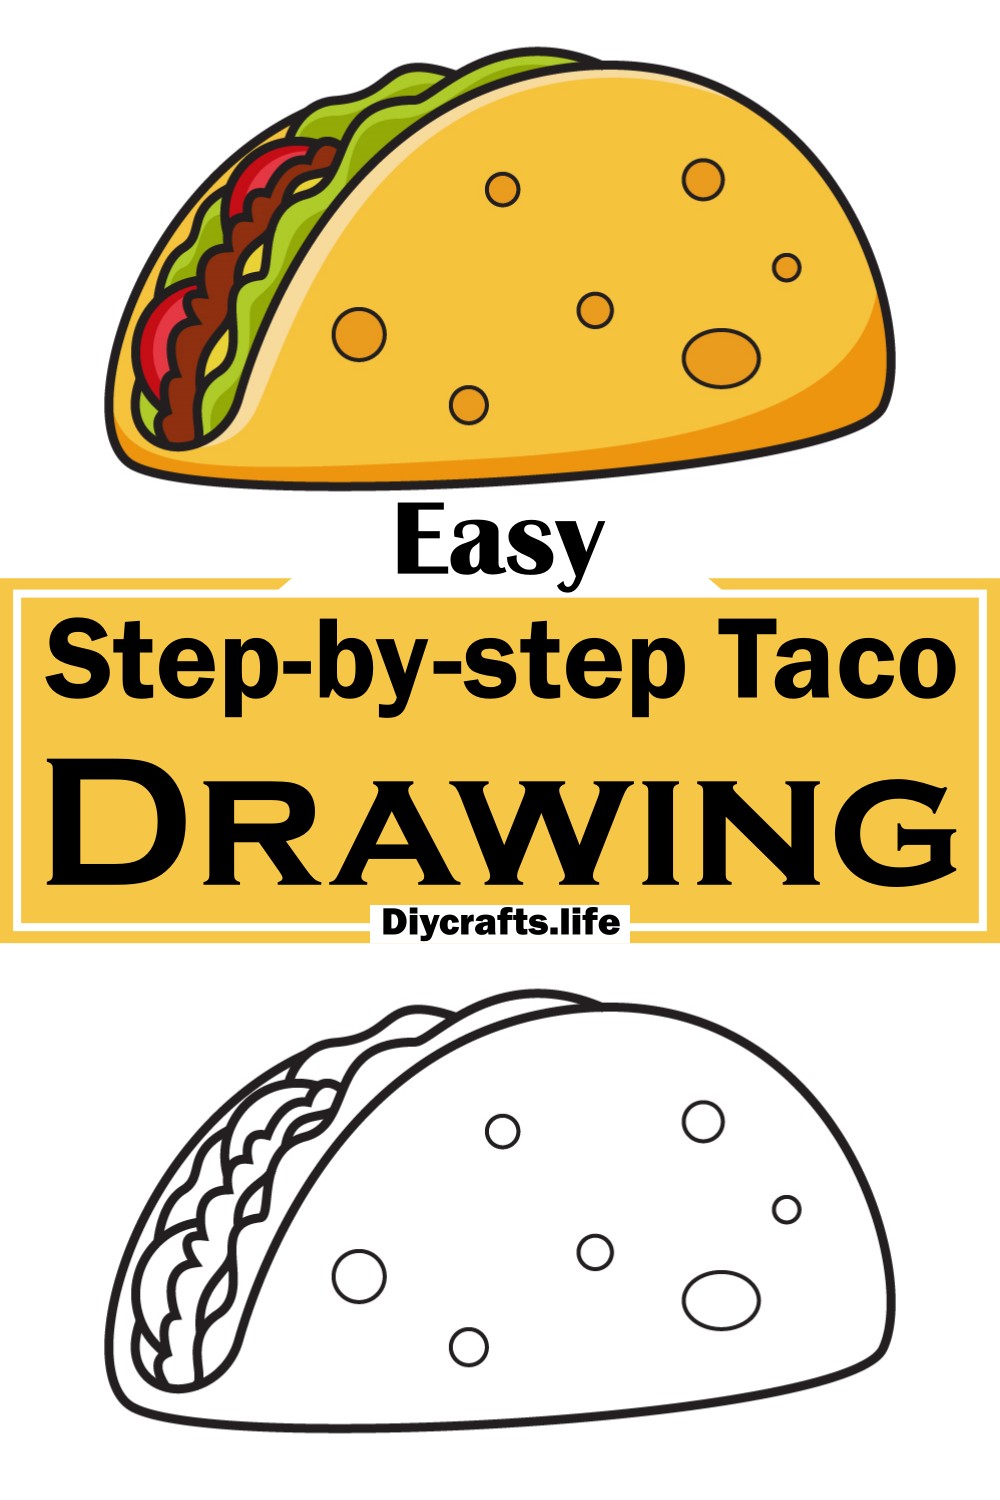 Step-by-step Taco Drawing